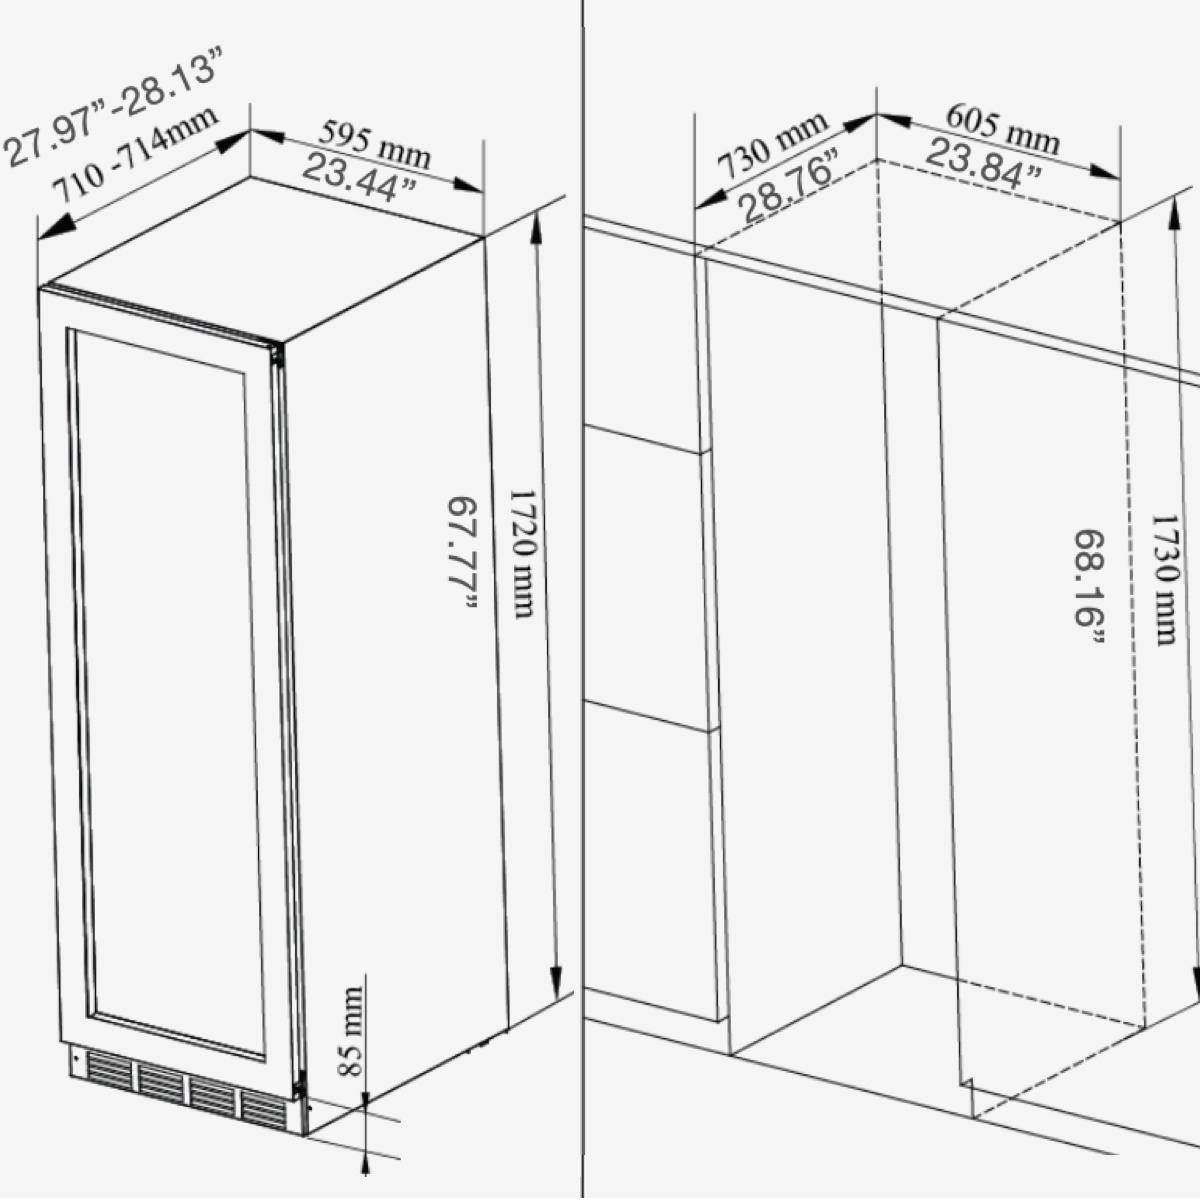 A drawing of a tall cabinet with a stainless steel frame, glass door, and stainless steel hanging rod, shelves, and salt tray.